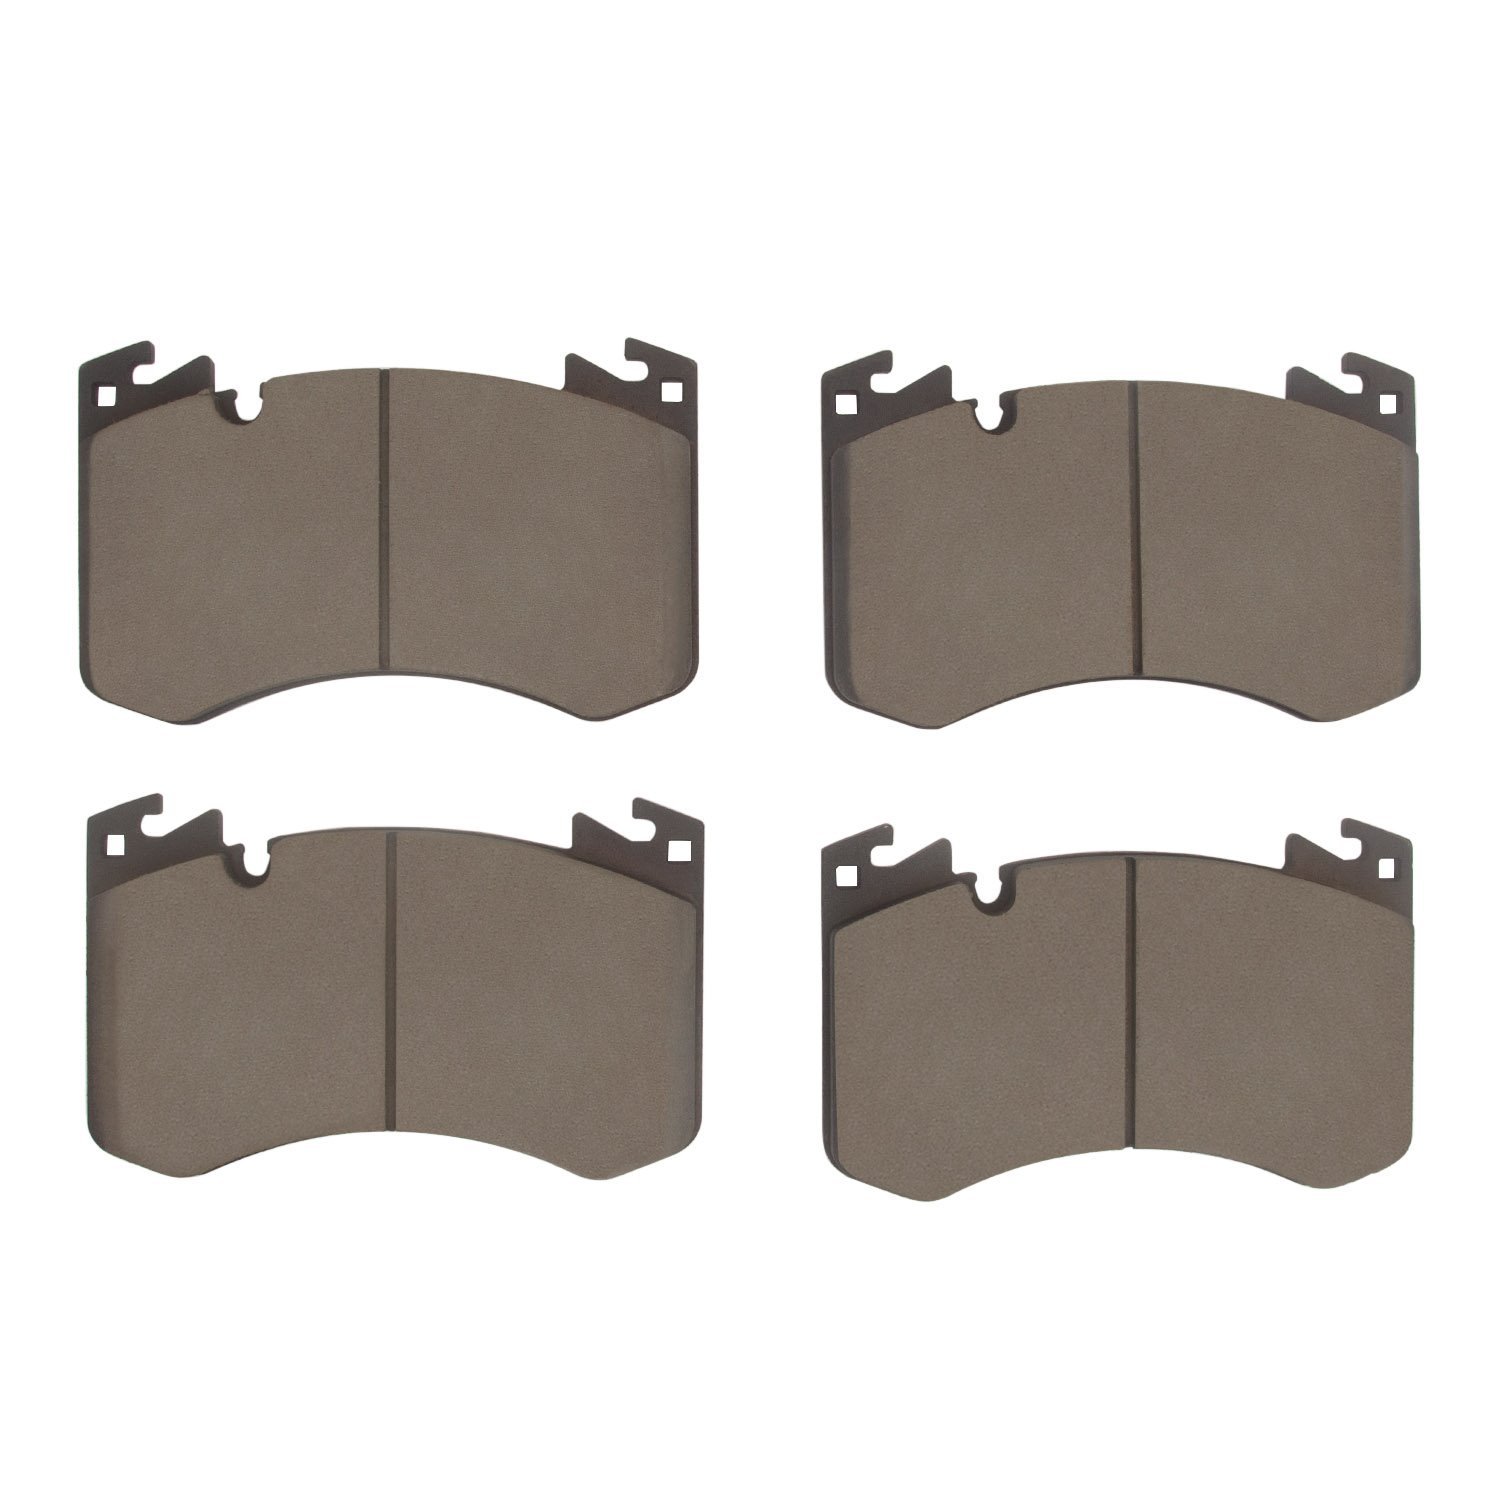 1600-2462-00 5000 Euro Ceramic Brake Pads, Fits Select Land Rover, Position: Front